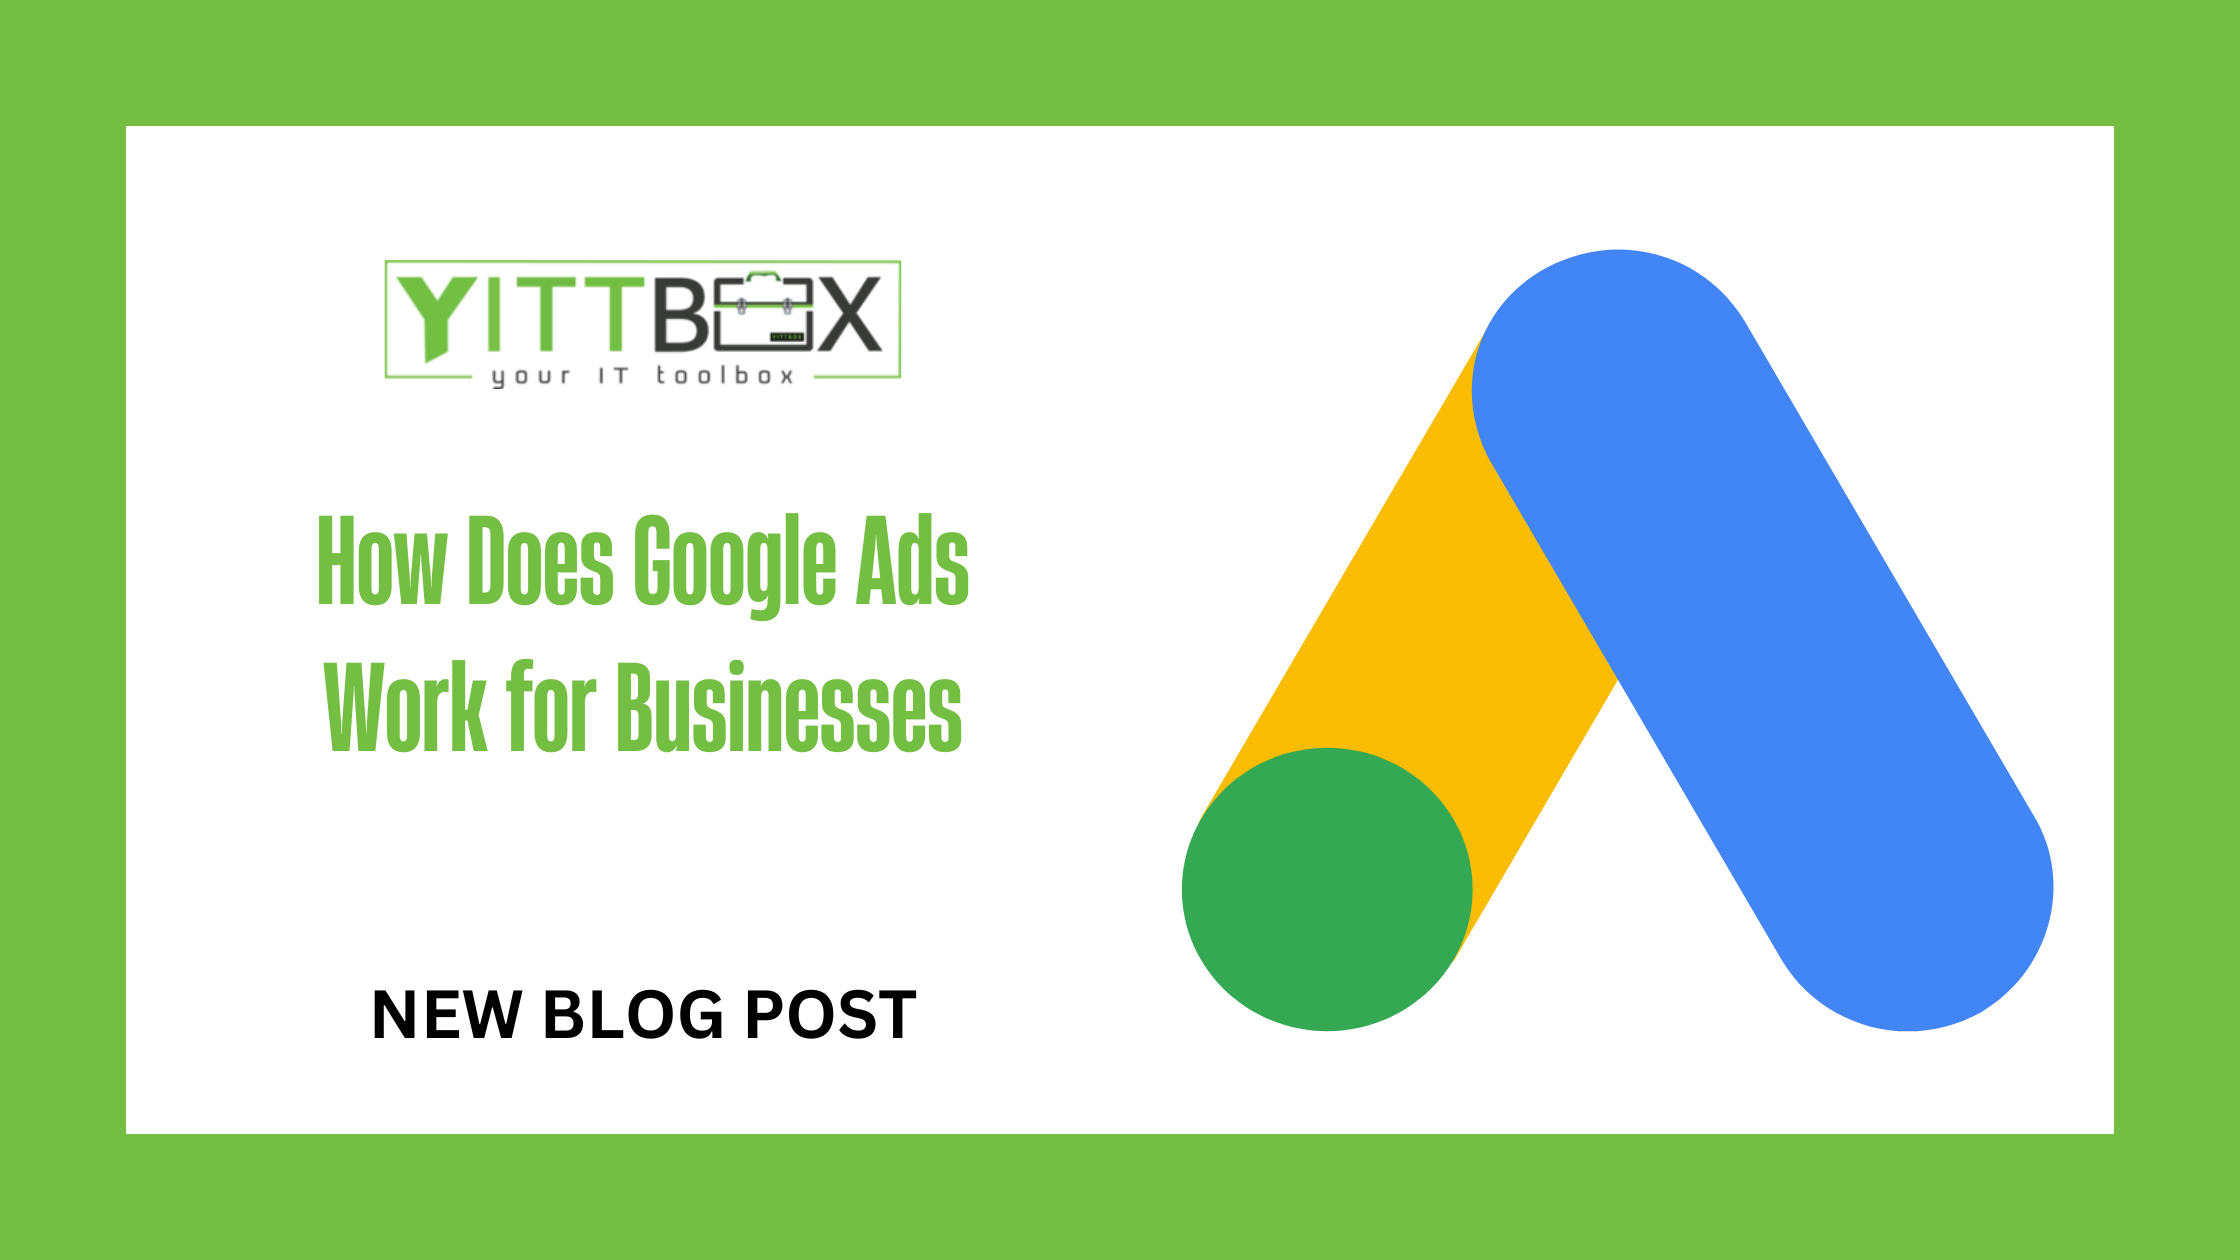 How Does Google Ads Work for Businesses